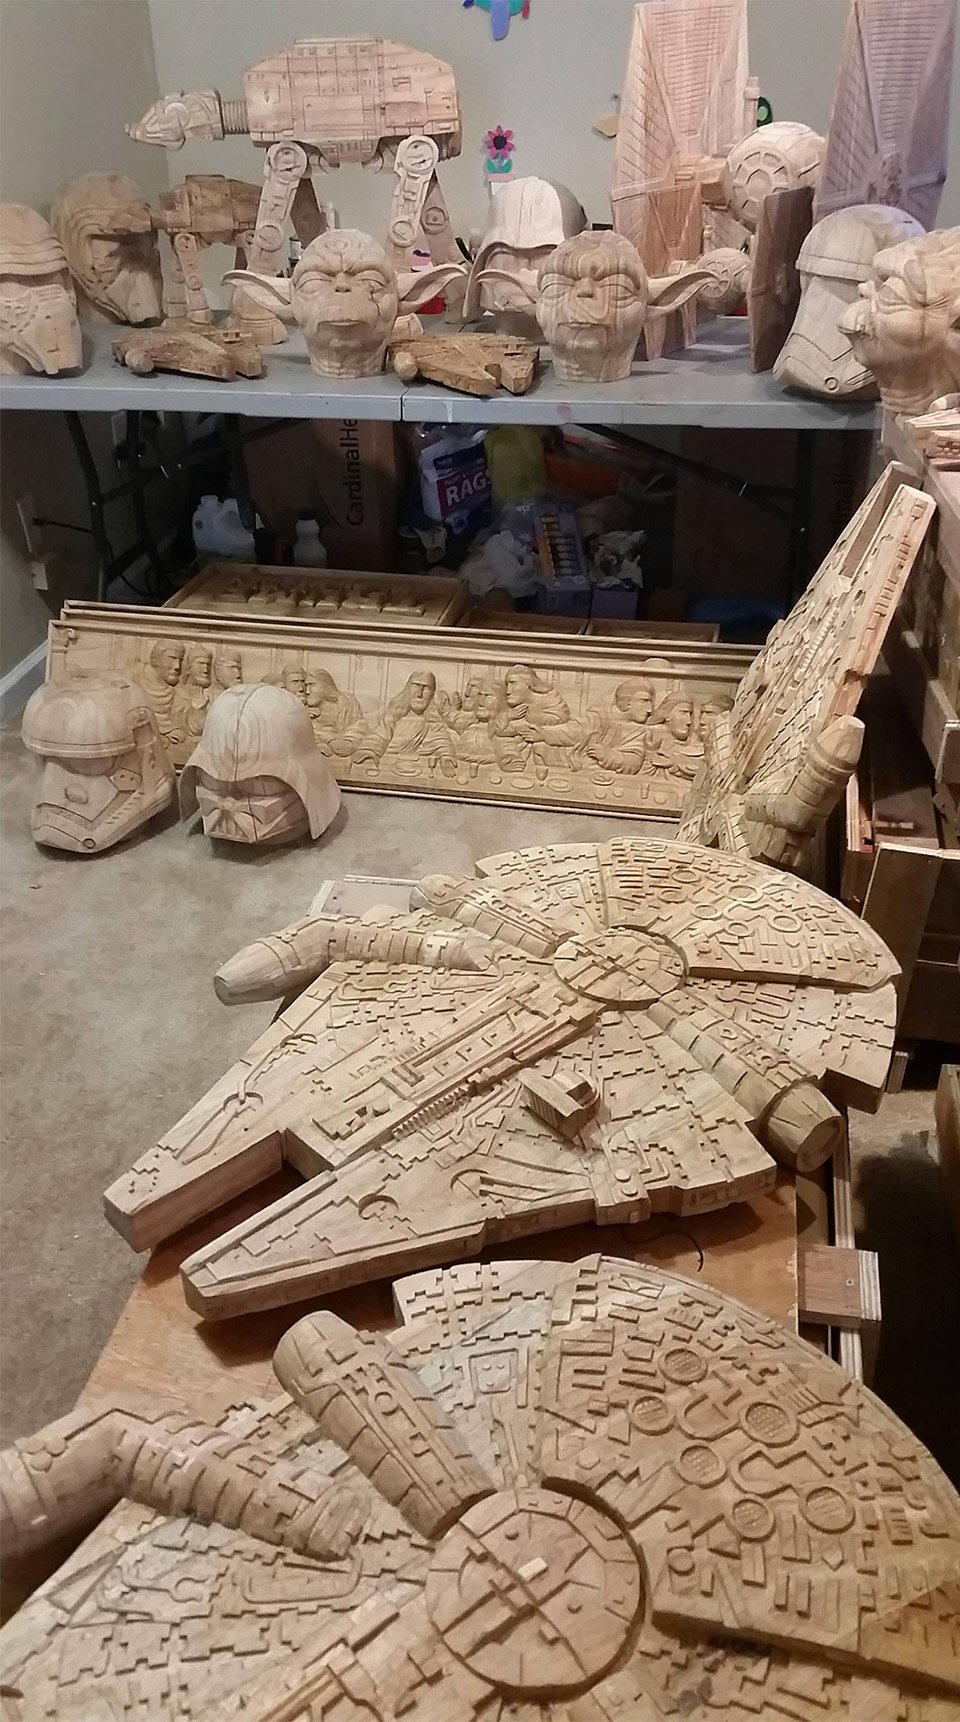 Carved Wood Millennium Falcons